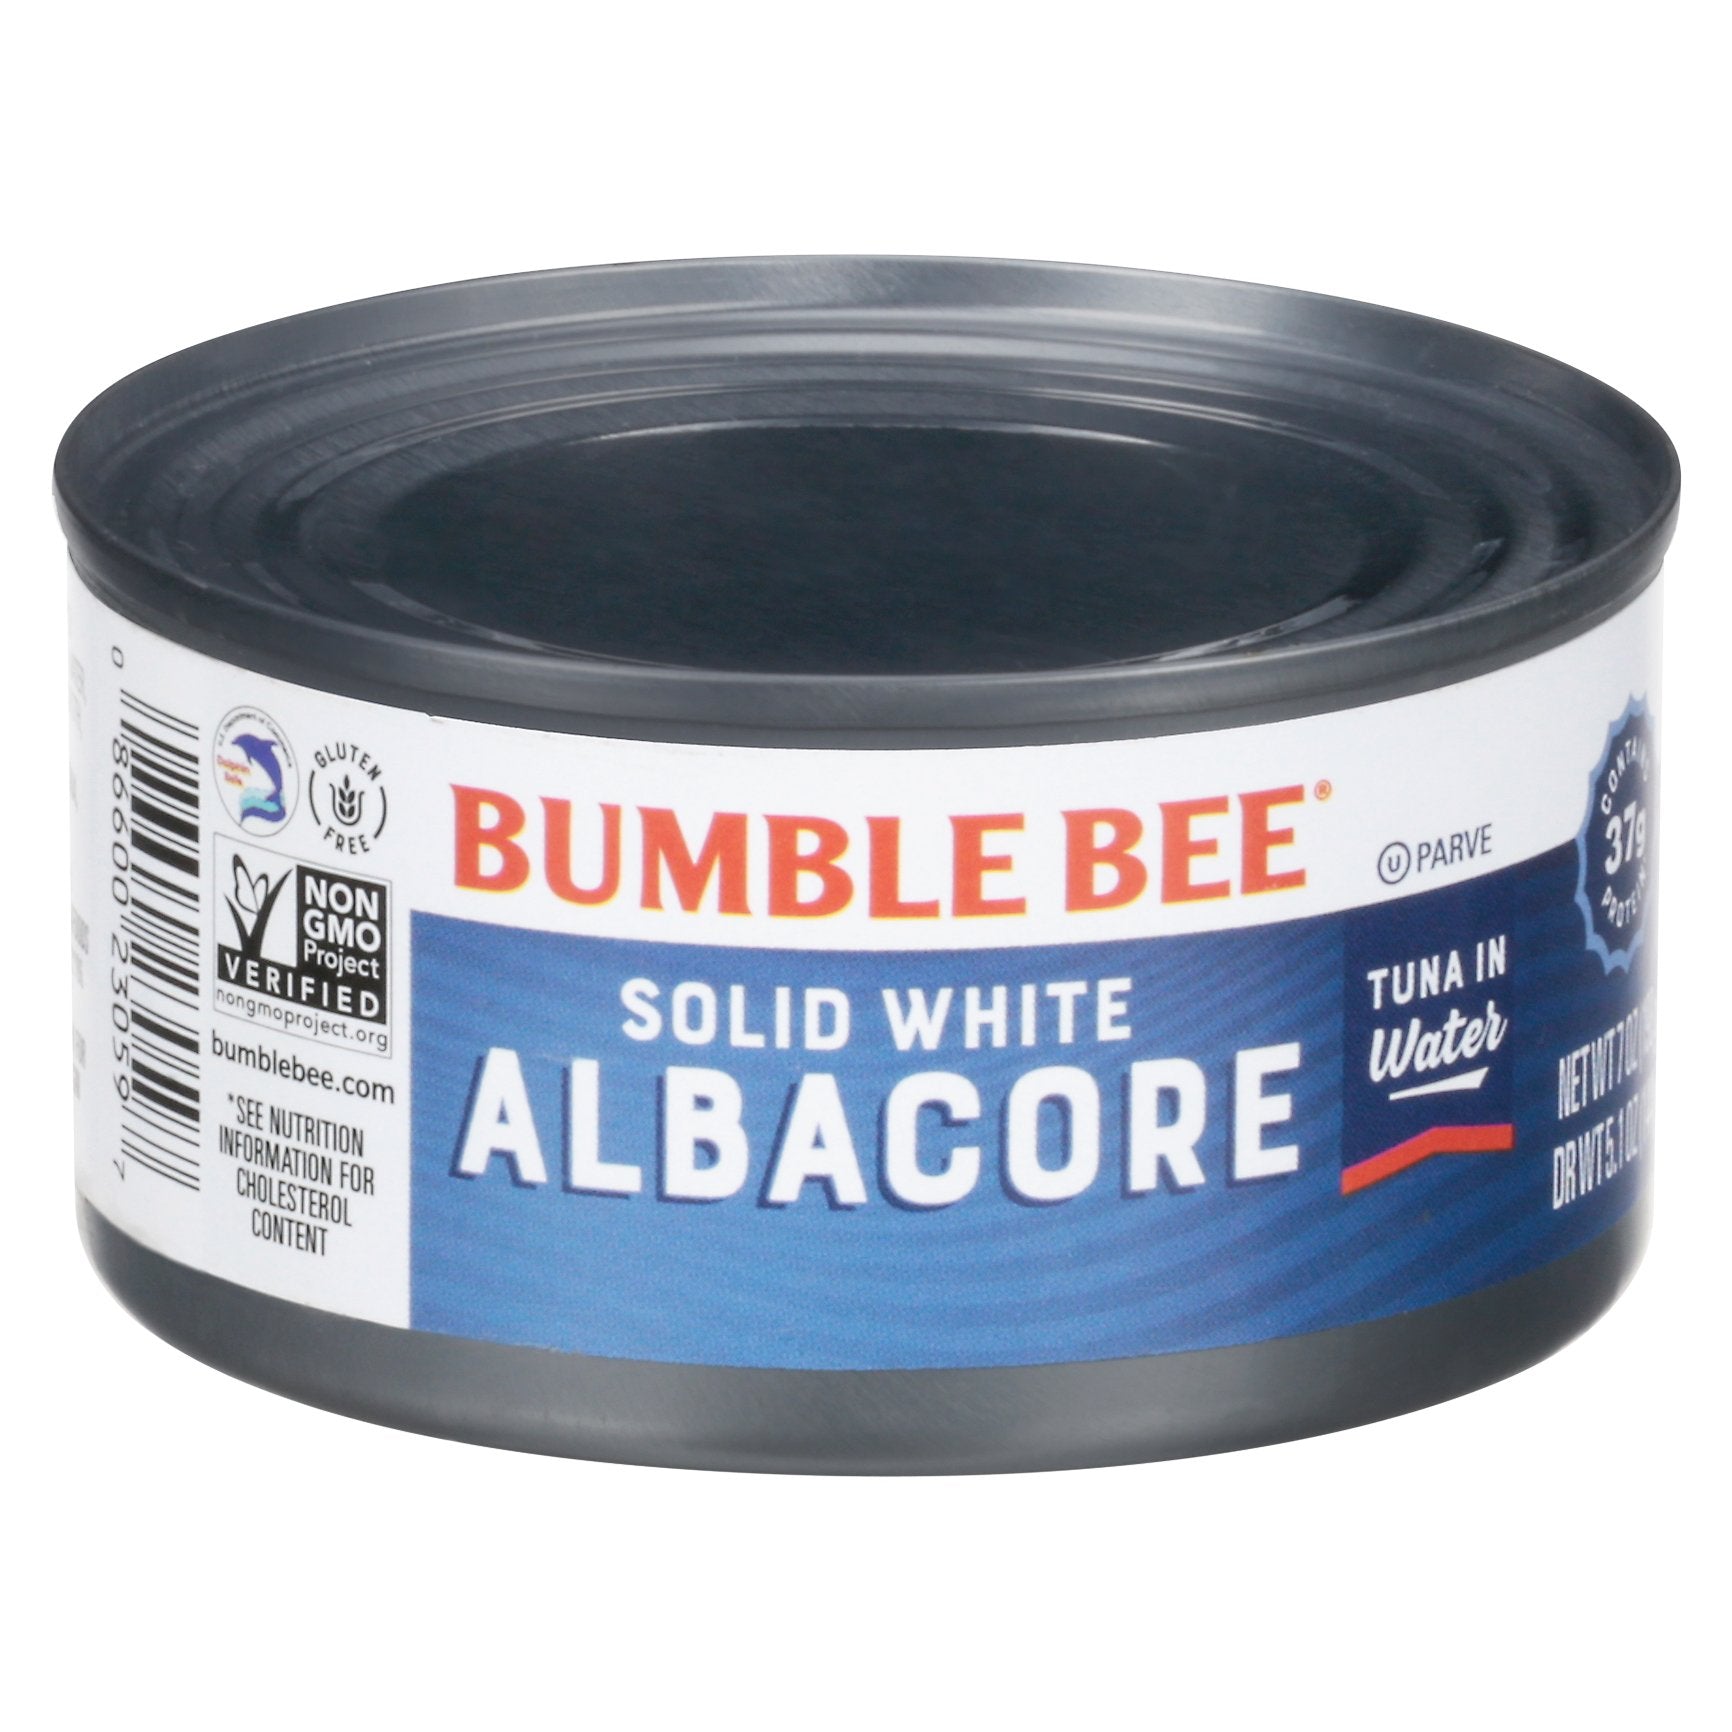 Bumble Bee Solid White Albacore Tuna in Water, 7 oz Can (Pack of 24) - Wild Caught Tuna - 37g Protein - Omega 3S - Non-GMO Project VERIFIED